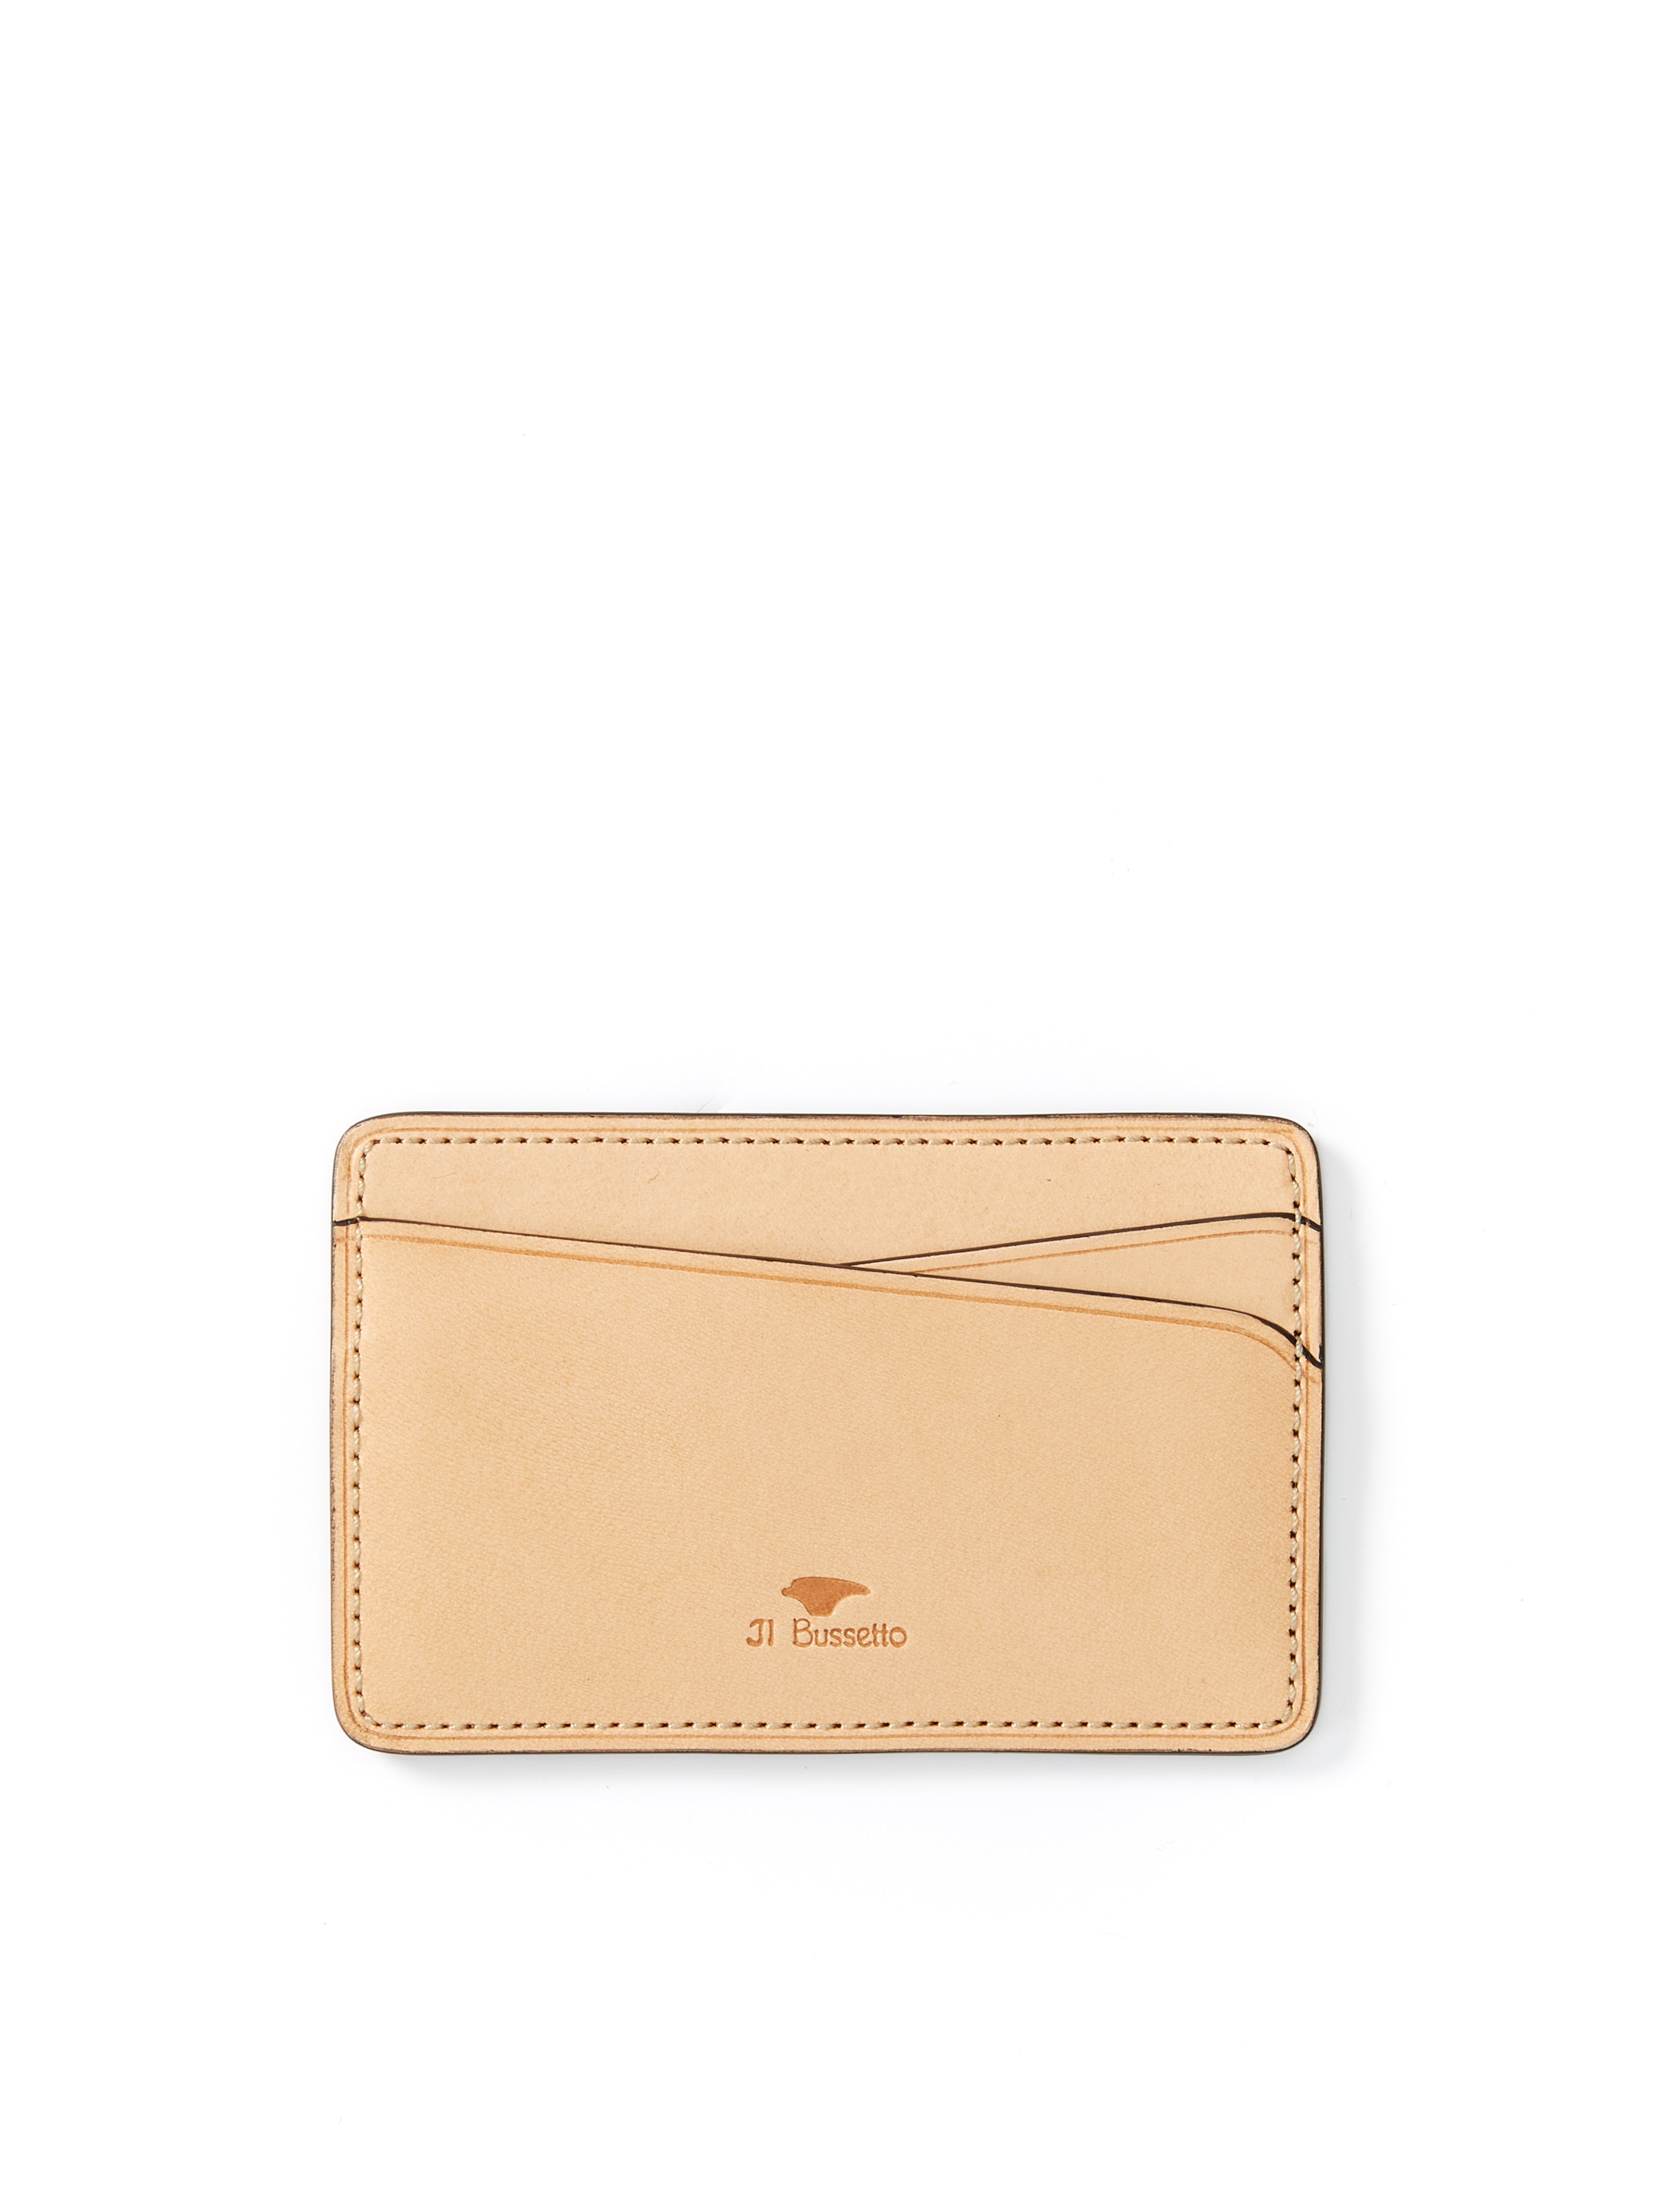 Il Bussetto Card Holder Tan Leather